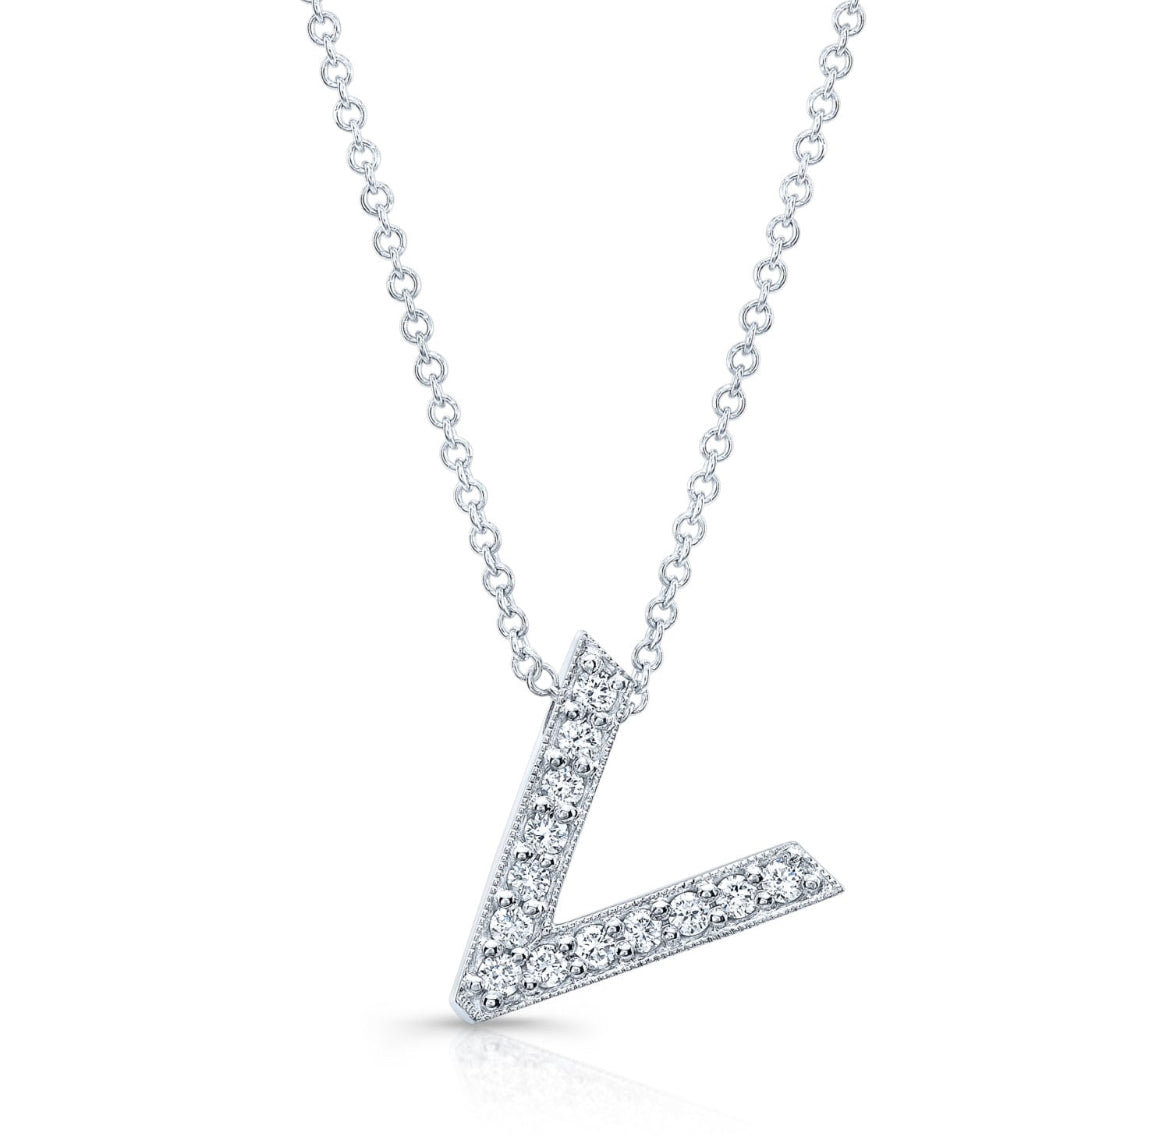 Platinum diamond initial pendant in the letter “V” with 0.15 ctw